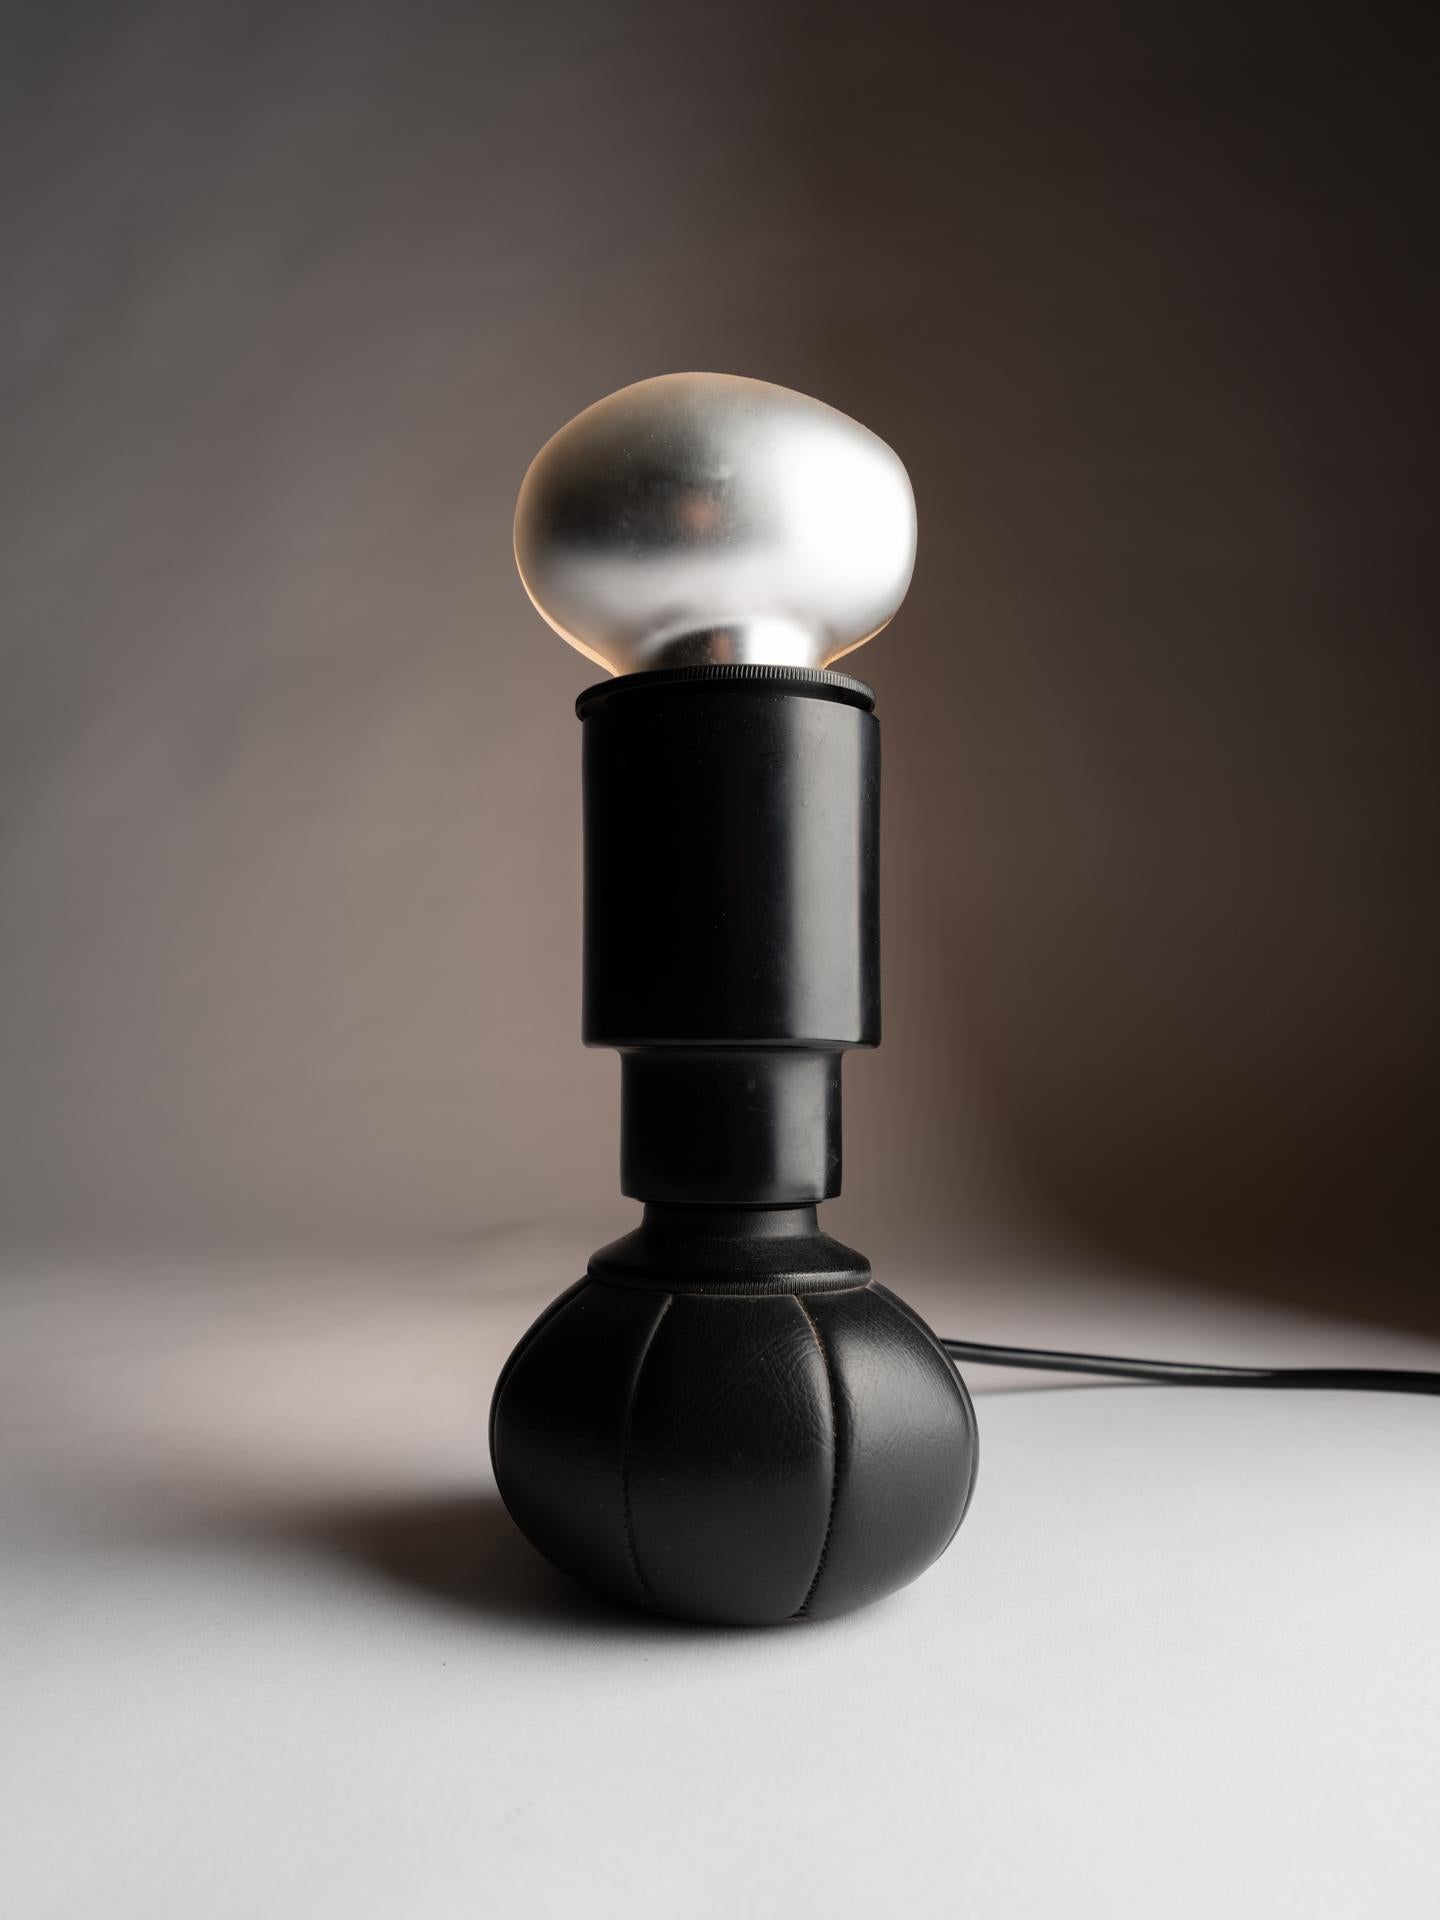 The 600C table lamp was designed by one of the greatest lighting designers of the 20th century Gino Sarfatti in 1966 for Arteluce Italy. 
It is made of black lacquered aluminum and it has a leather pouch filled with lead shot at the base . The type